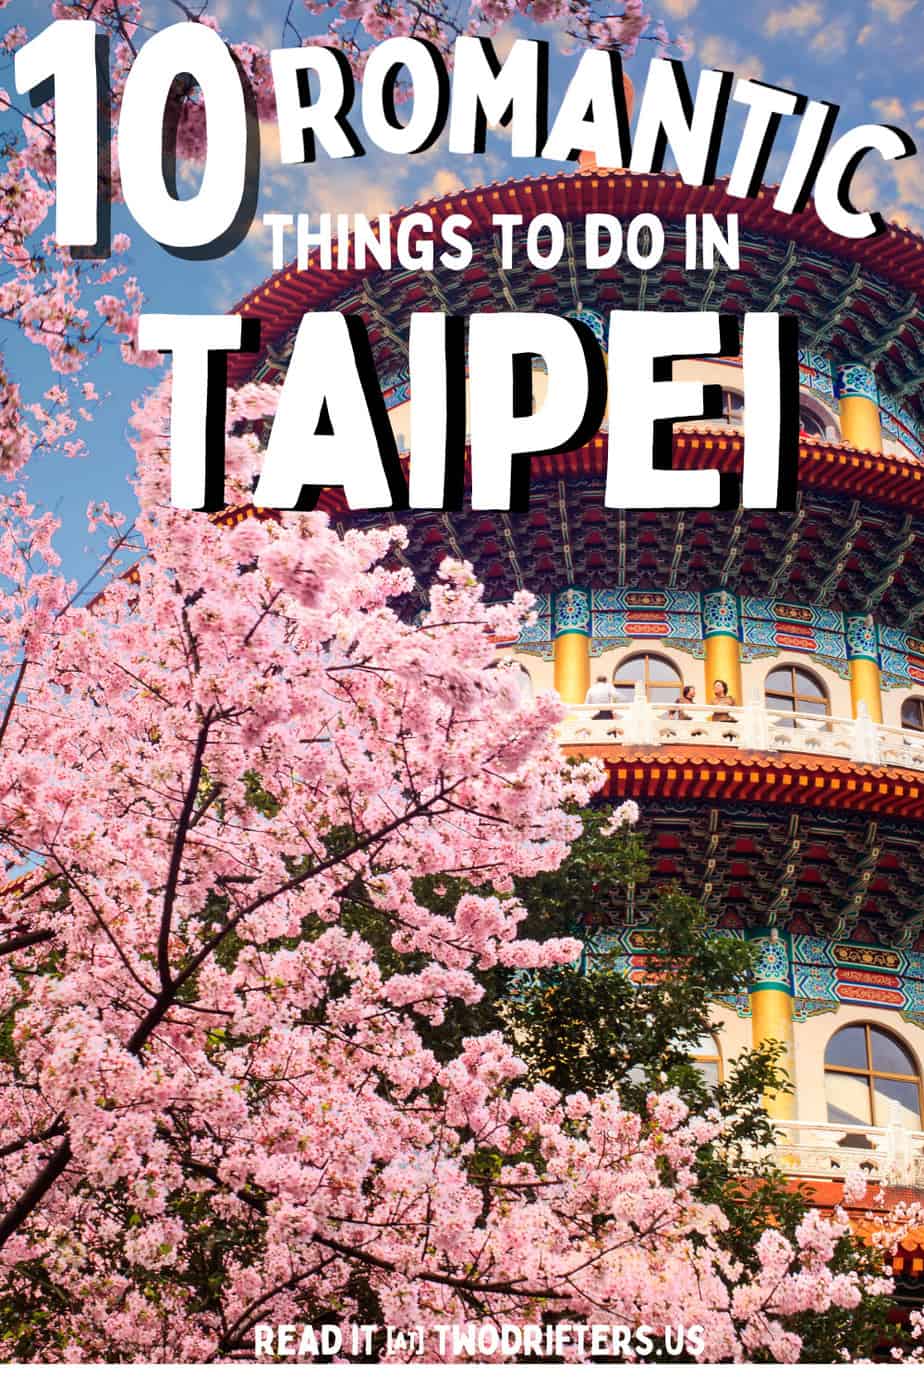 Pinterest social share image that says "10 Romantic Things to do in Taipei."